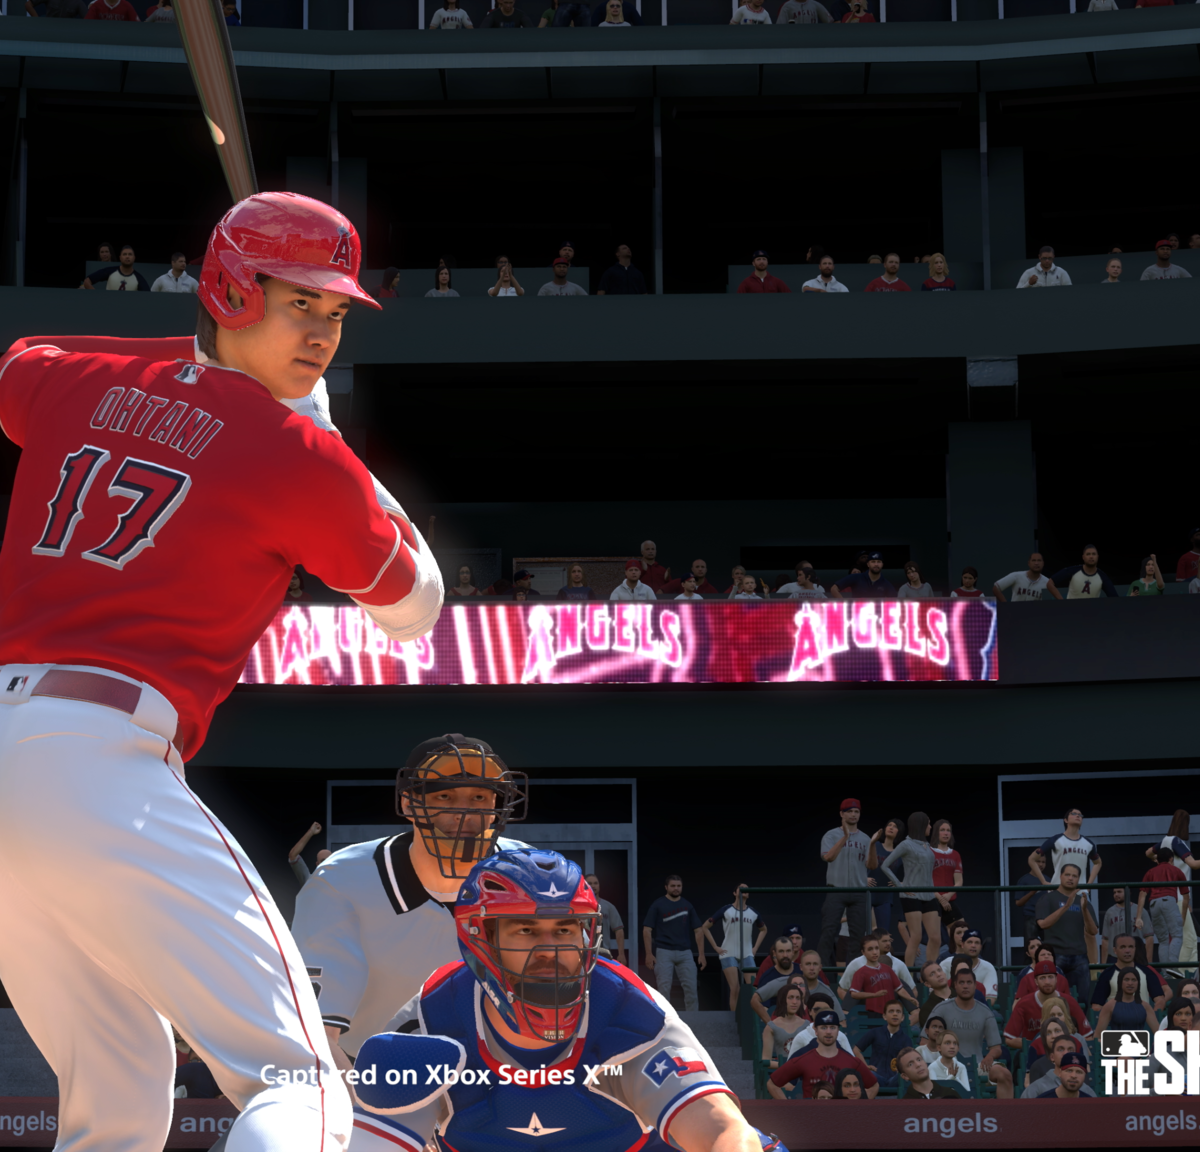 MLB The Show 20: 4 teams to rebrand and relocate in Franchise mode - Page 3